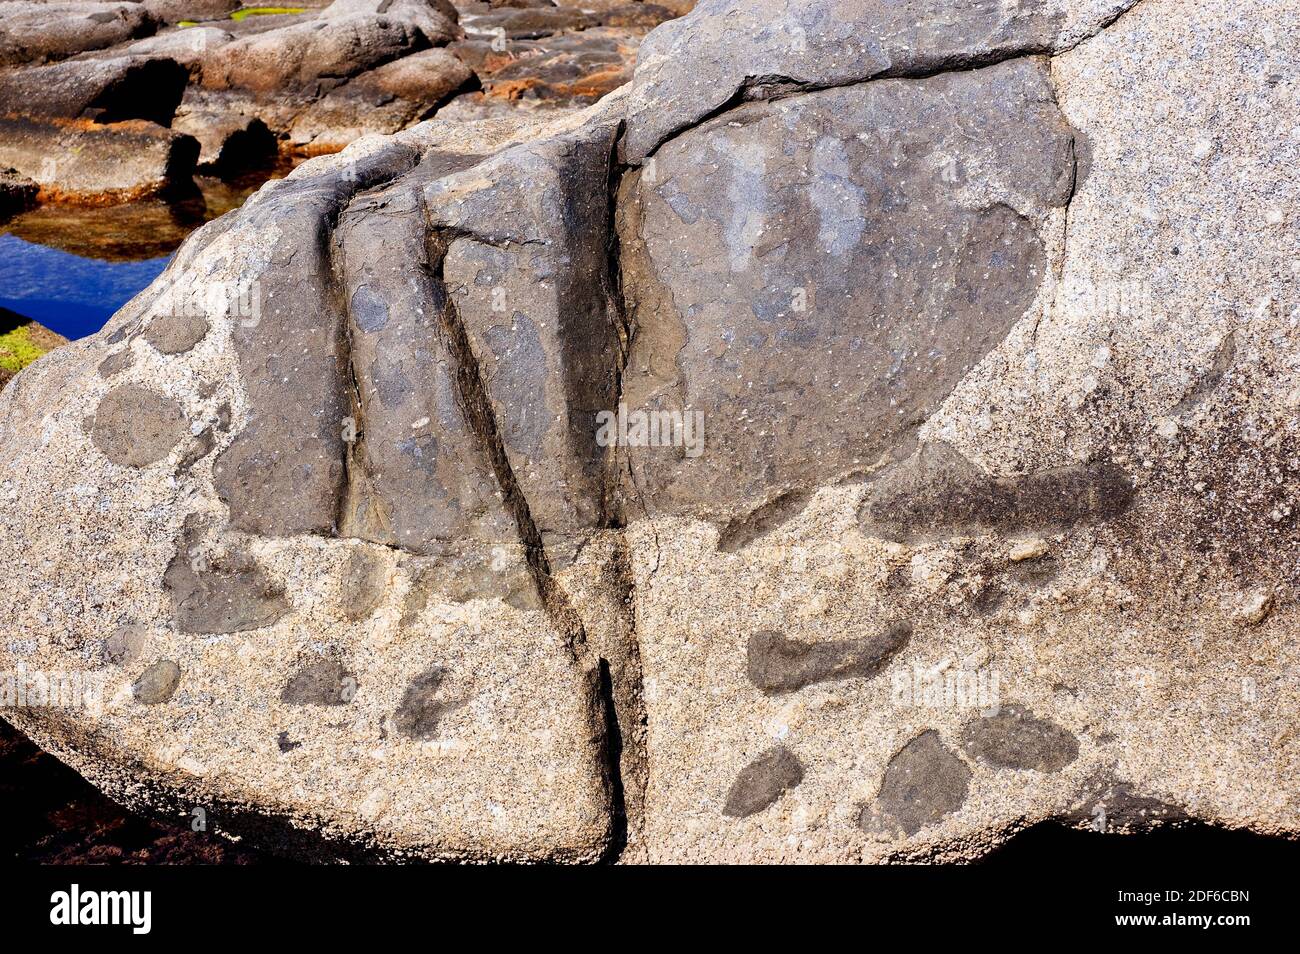 Lamprophyres xenoliths in a granite rock. Xenolith is a rock fragment enveloped in a larger different rock. Calella de Palafrugell, Girona, Stock Photo